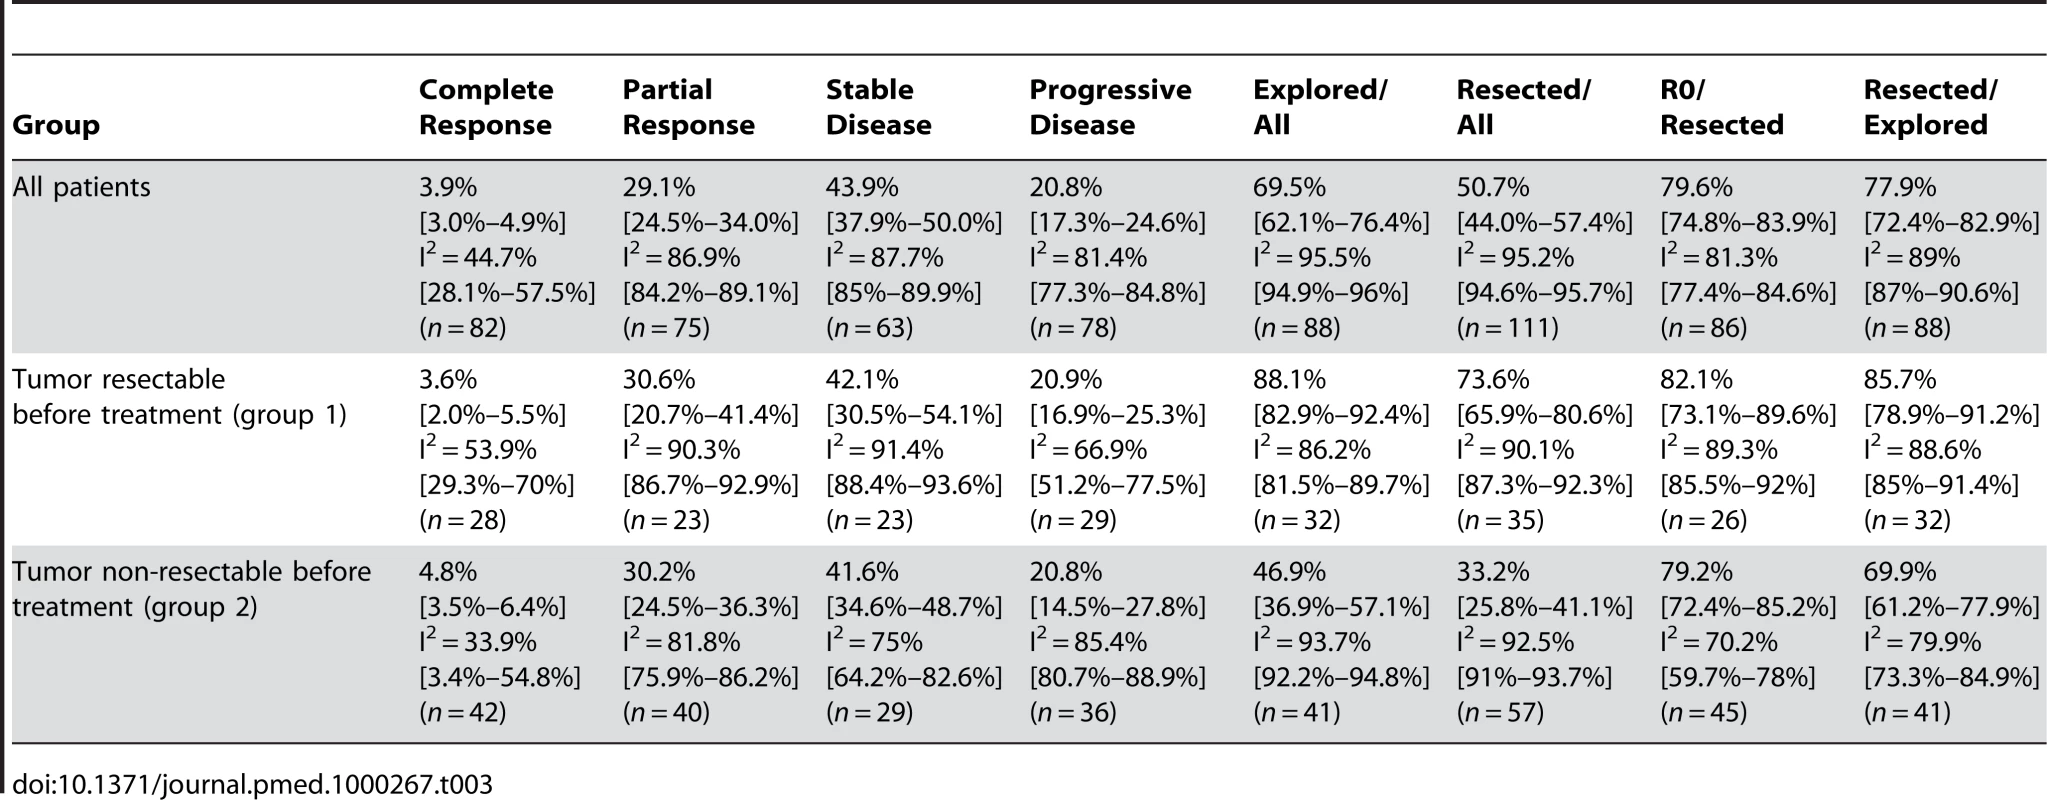 Estimates of exploration and resection percentages after neoadjuvant treatment and restaging, and estimates of patients with complete response/partial response, stable disease, and progressive disease including the 95% confidence interval from the random effect model and number of assessable studies for each group (&lt;i&gt;n&lt;/i&gt;).